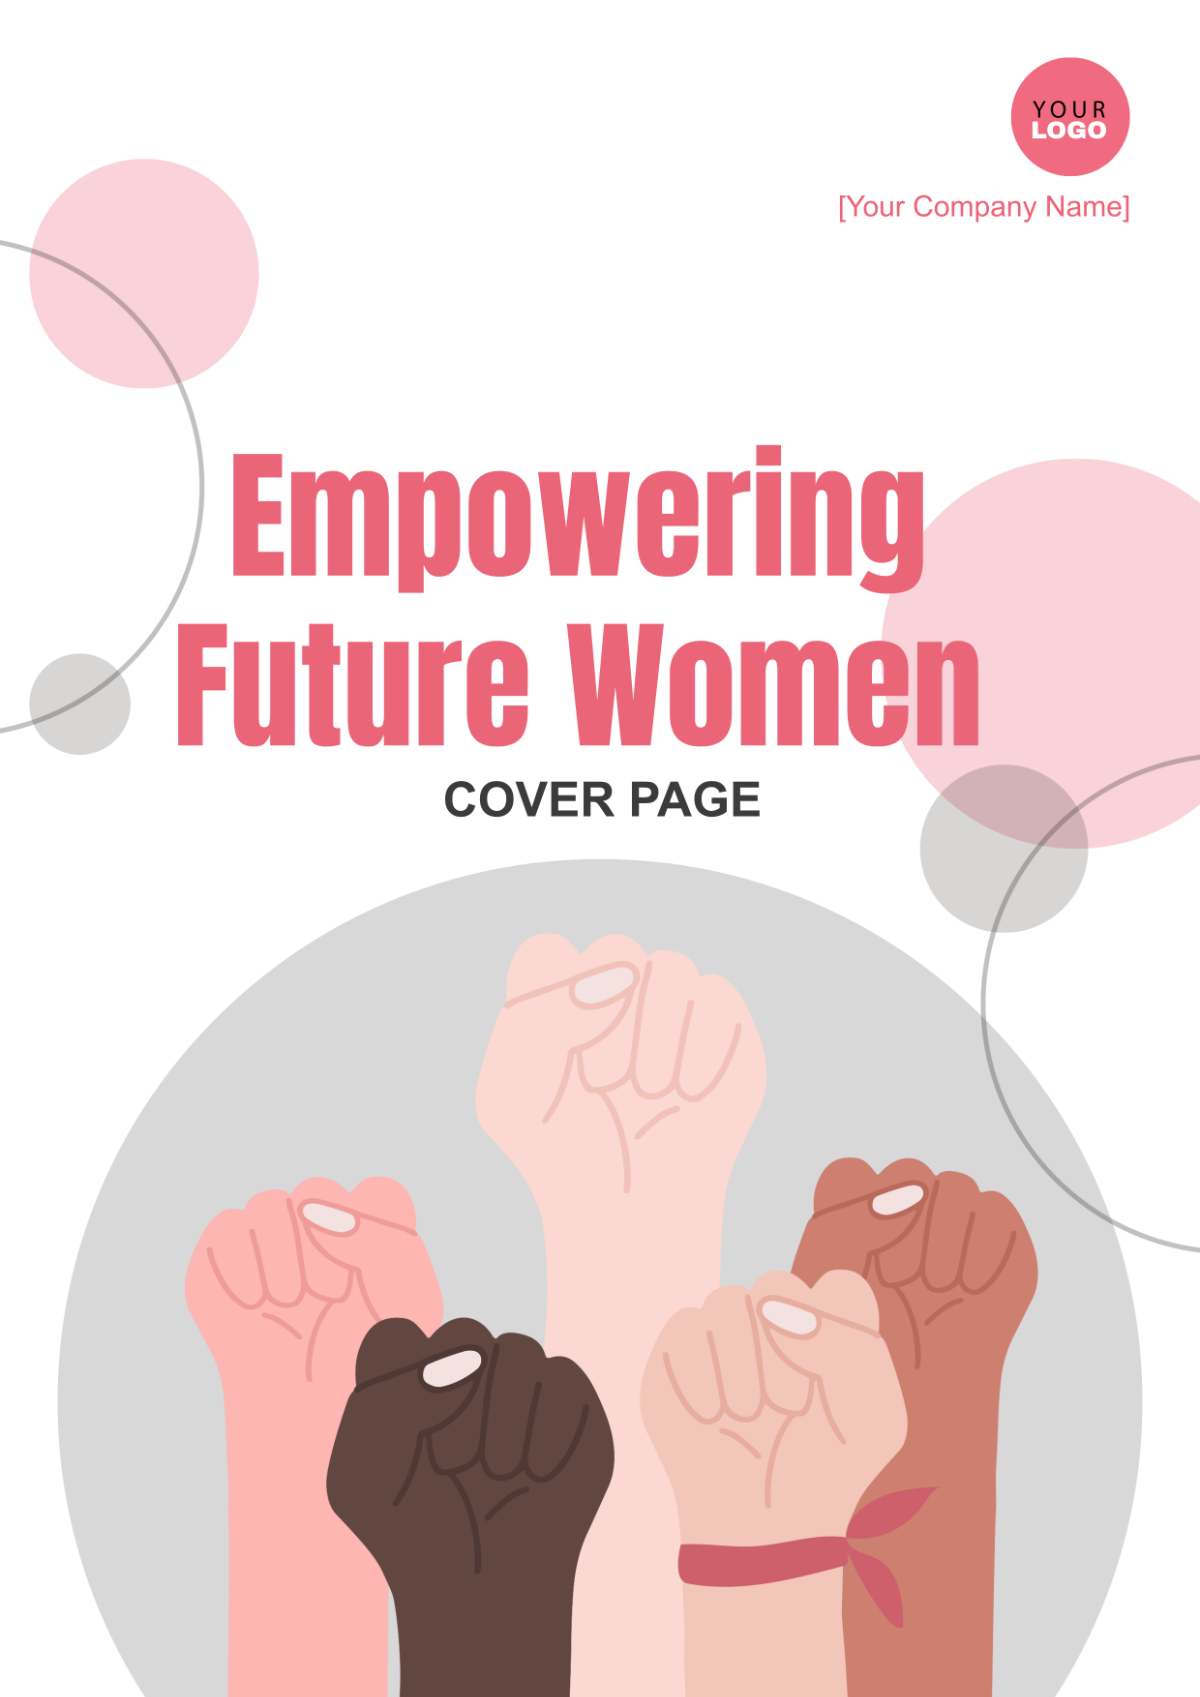 Empowering Future Women Cover Page Template